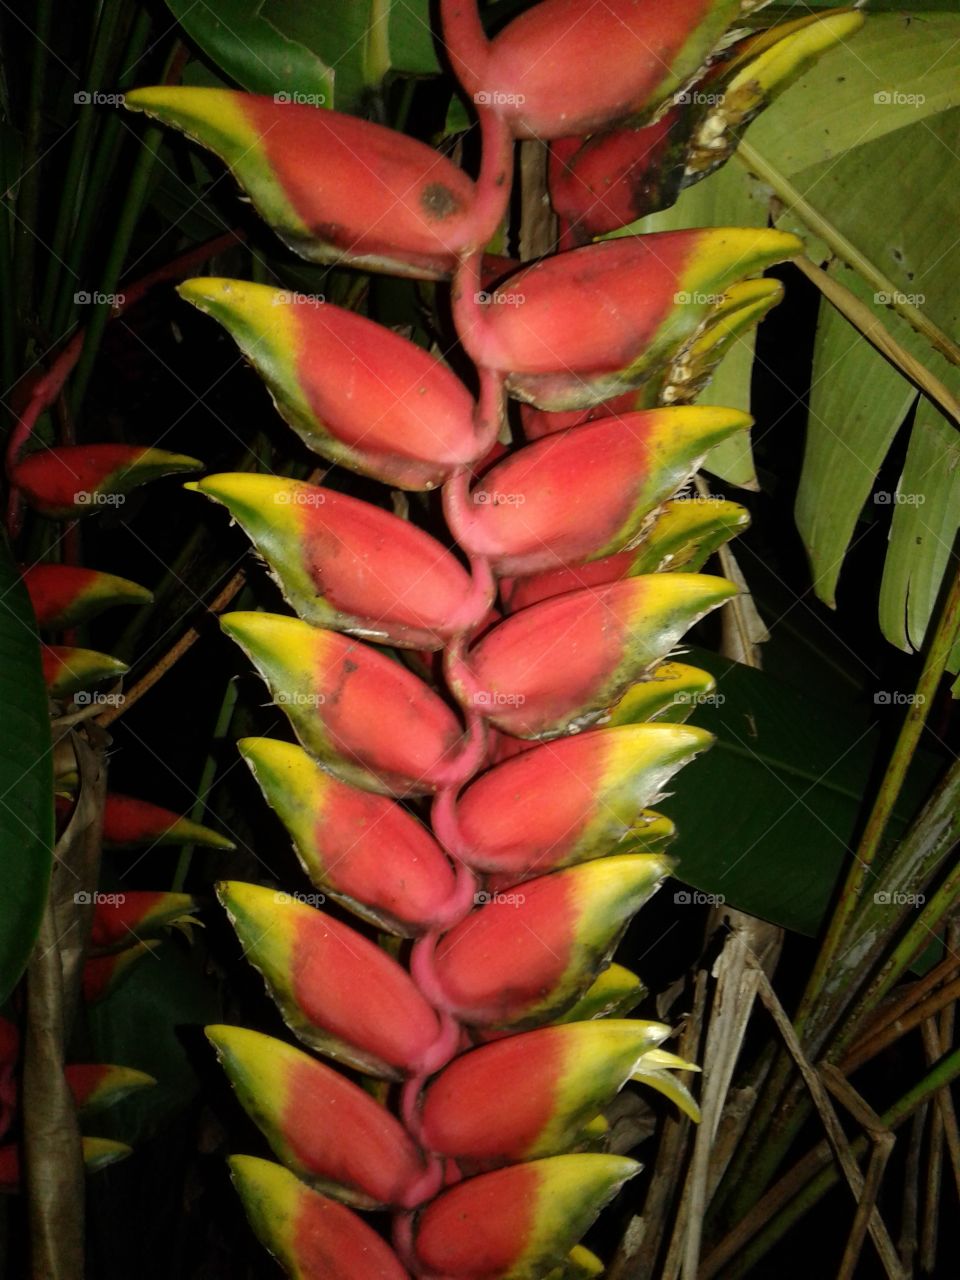 Jangal parrot (Heliconia species)